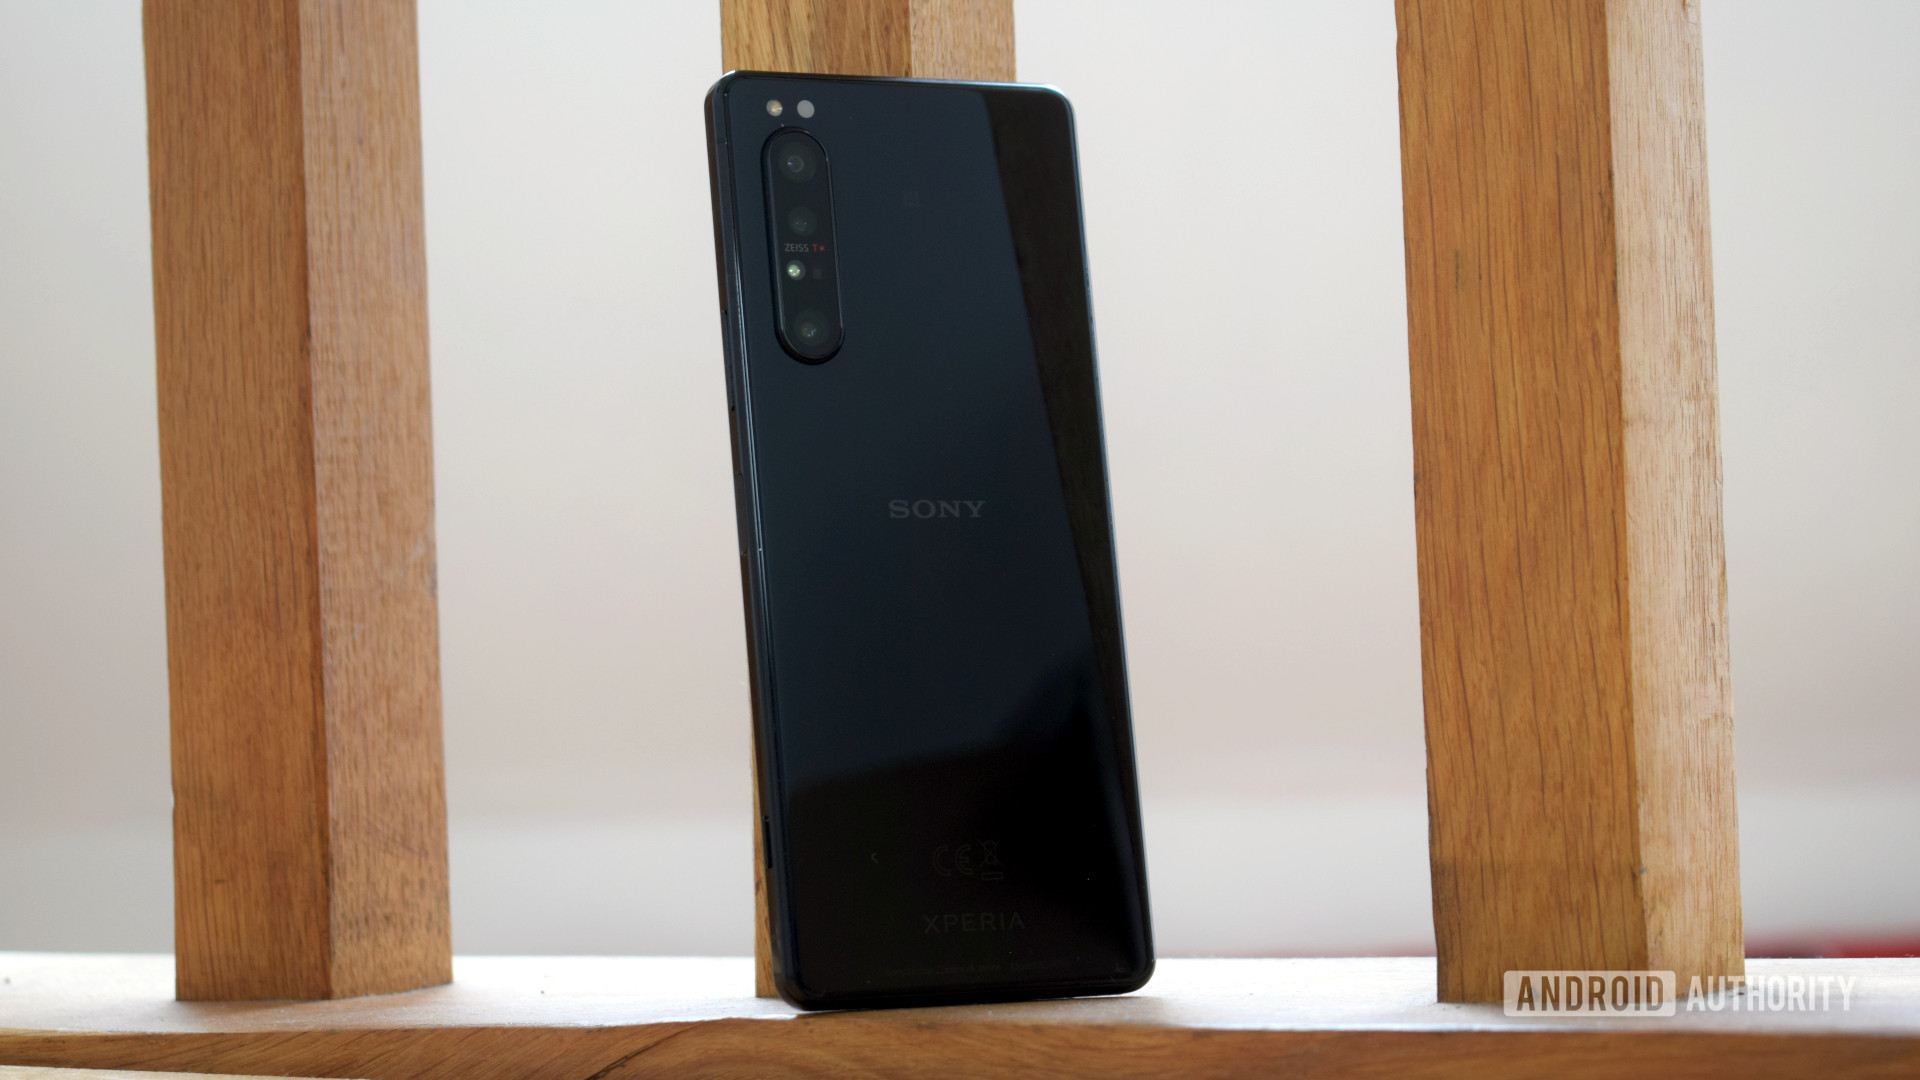 The Sony Xperia 1 II rear view with camera.